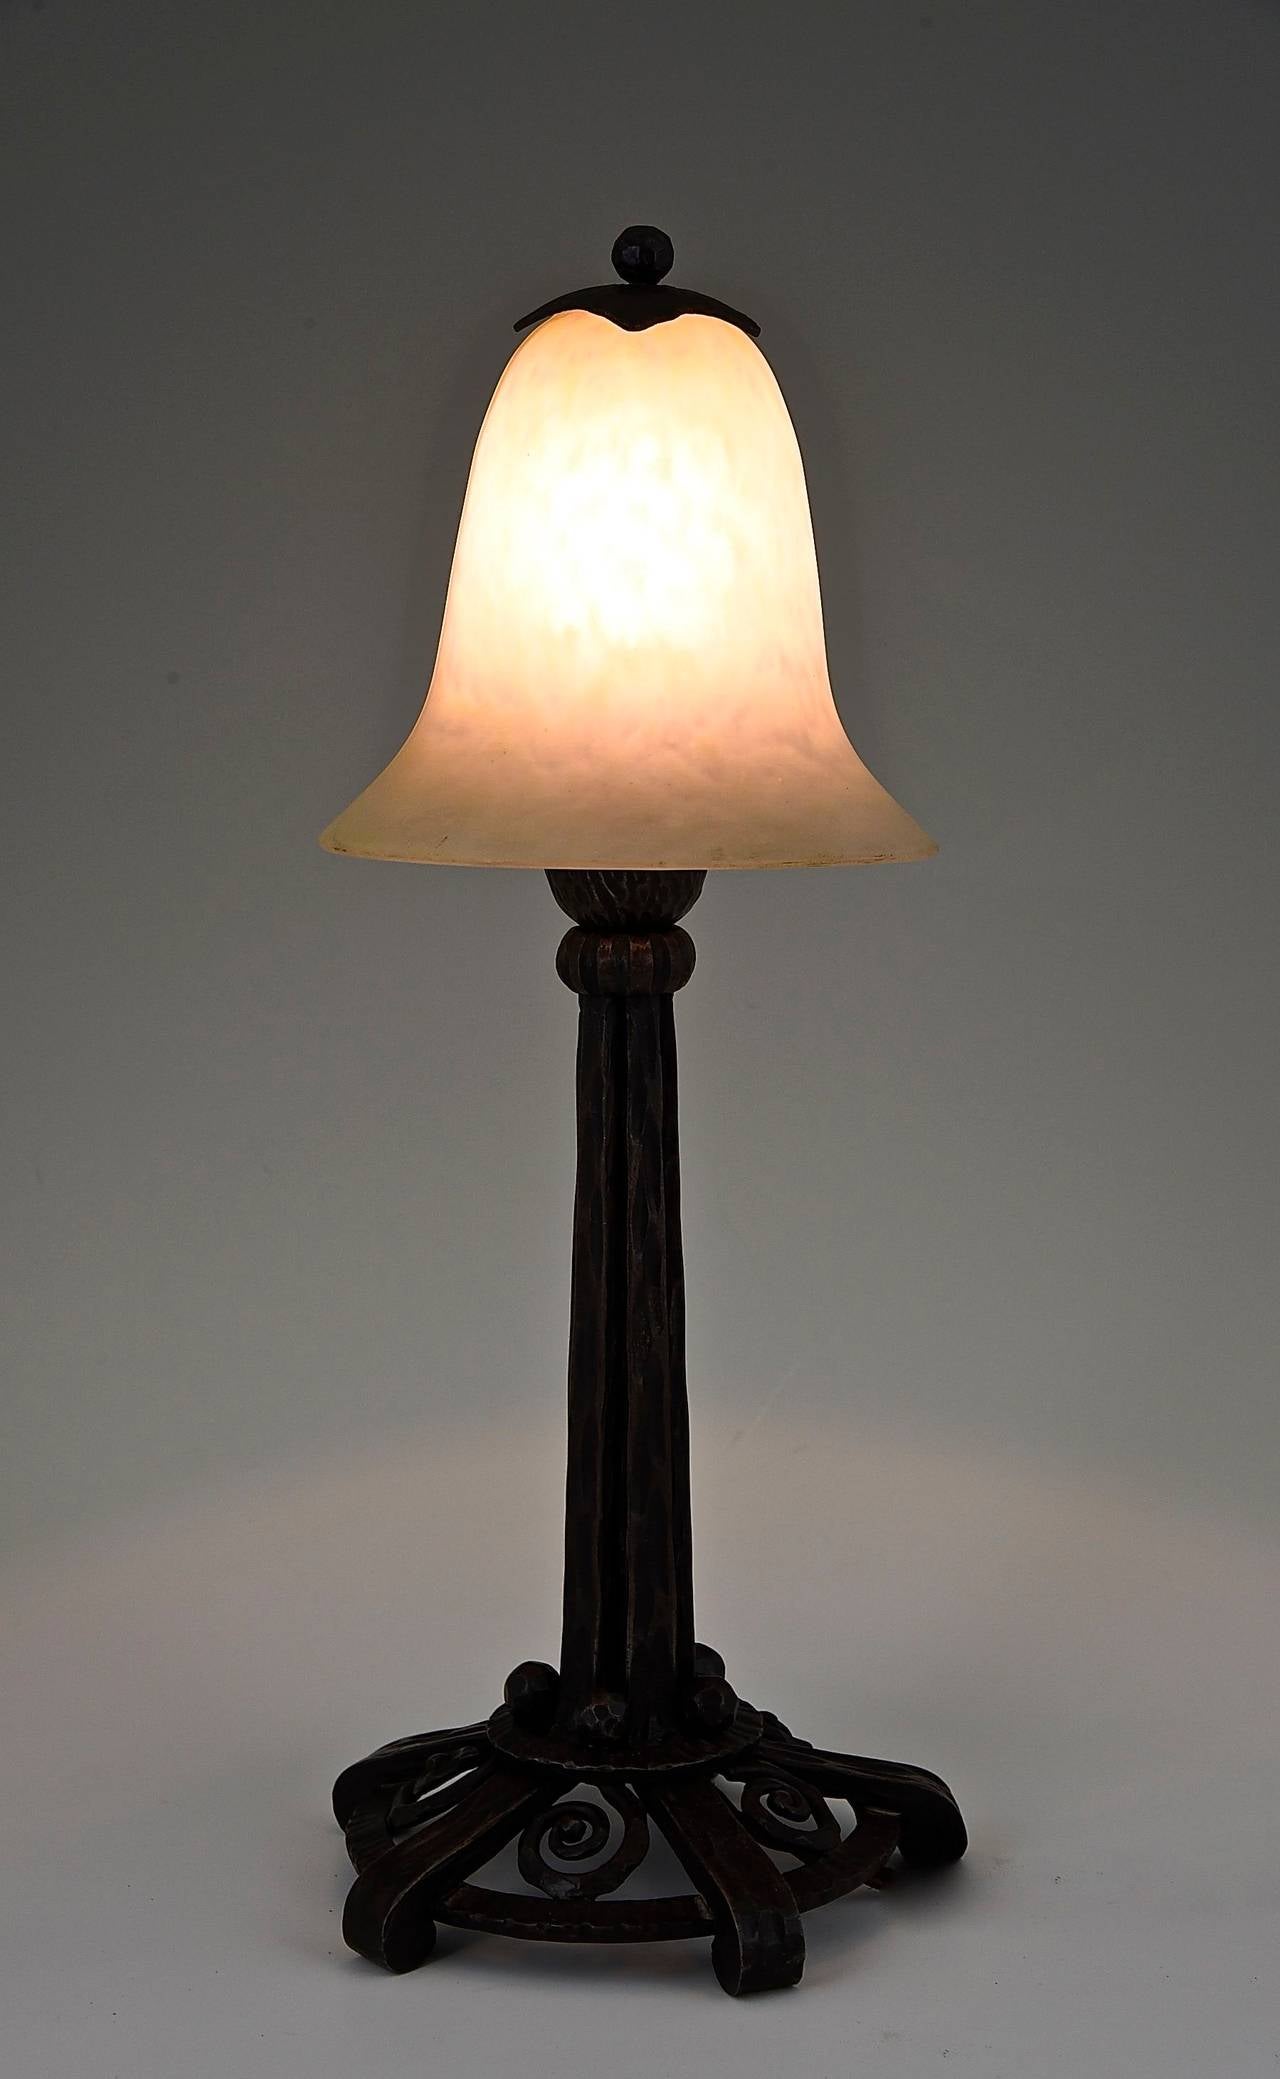 A Schneider table lamp.
Artist/ Maker:  Charles Schneider. 
Signature/ Marks:  Schneider on the glass shade. 	 
Style:  Art deco. 		
Date:  1924-1928.			
Material:  Cloudy off white and yellow glass shade on a fine wrought iron base. 
Origin: